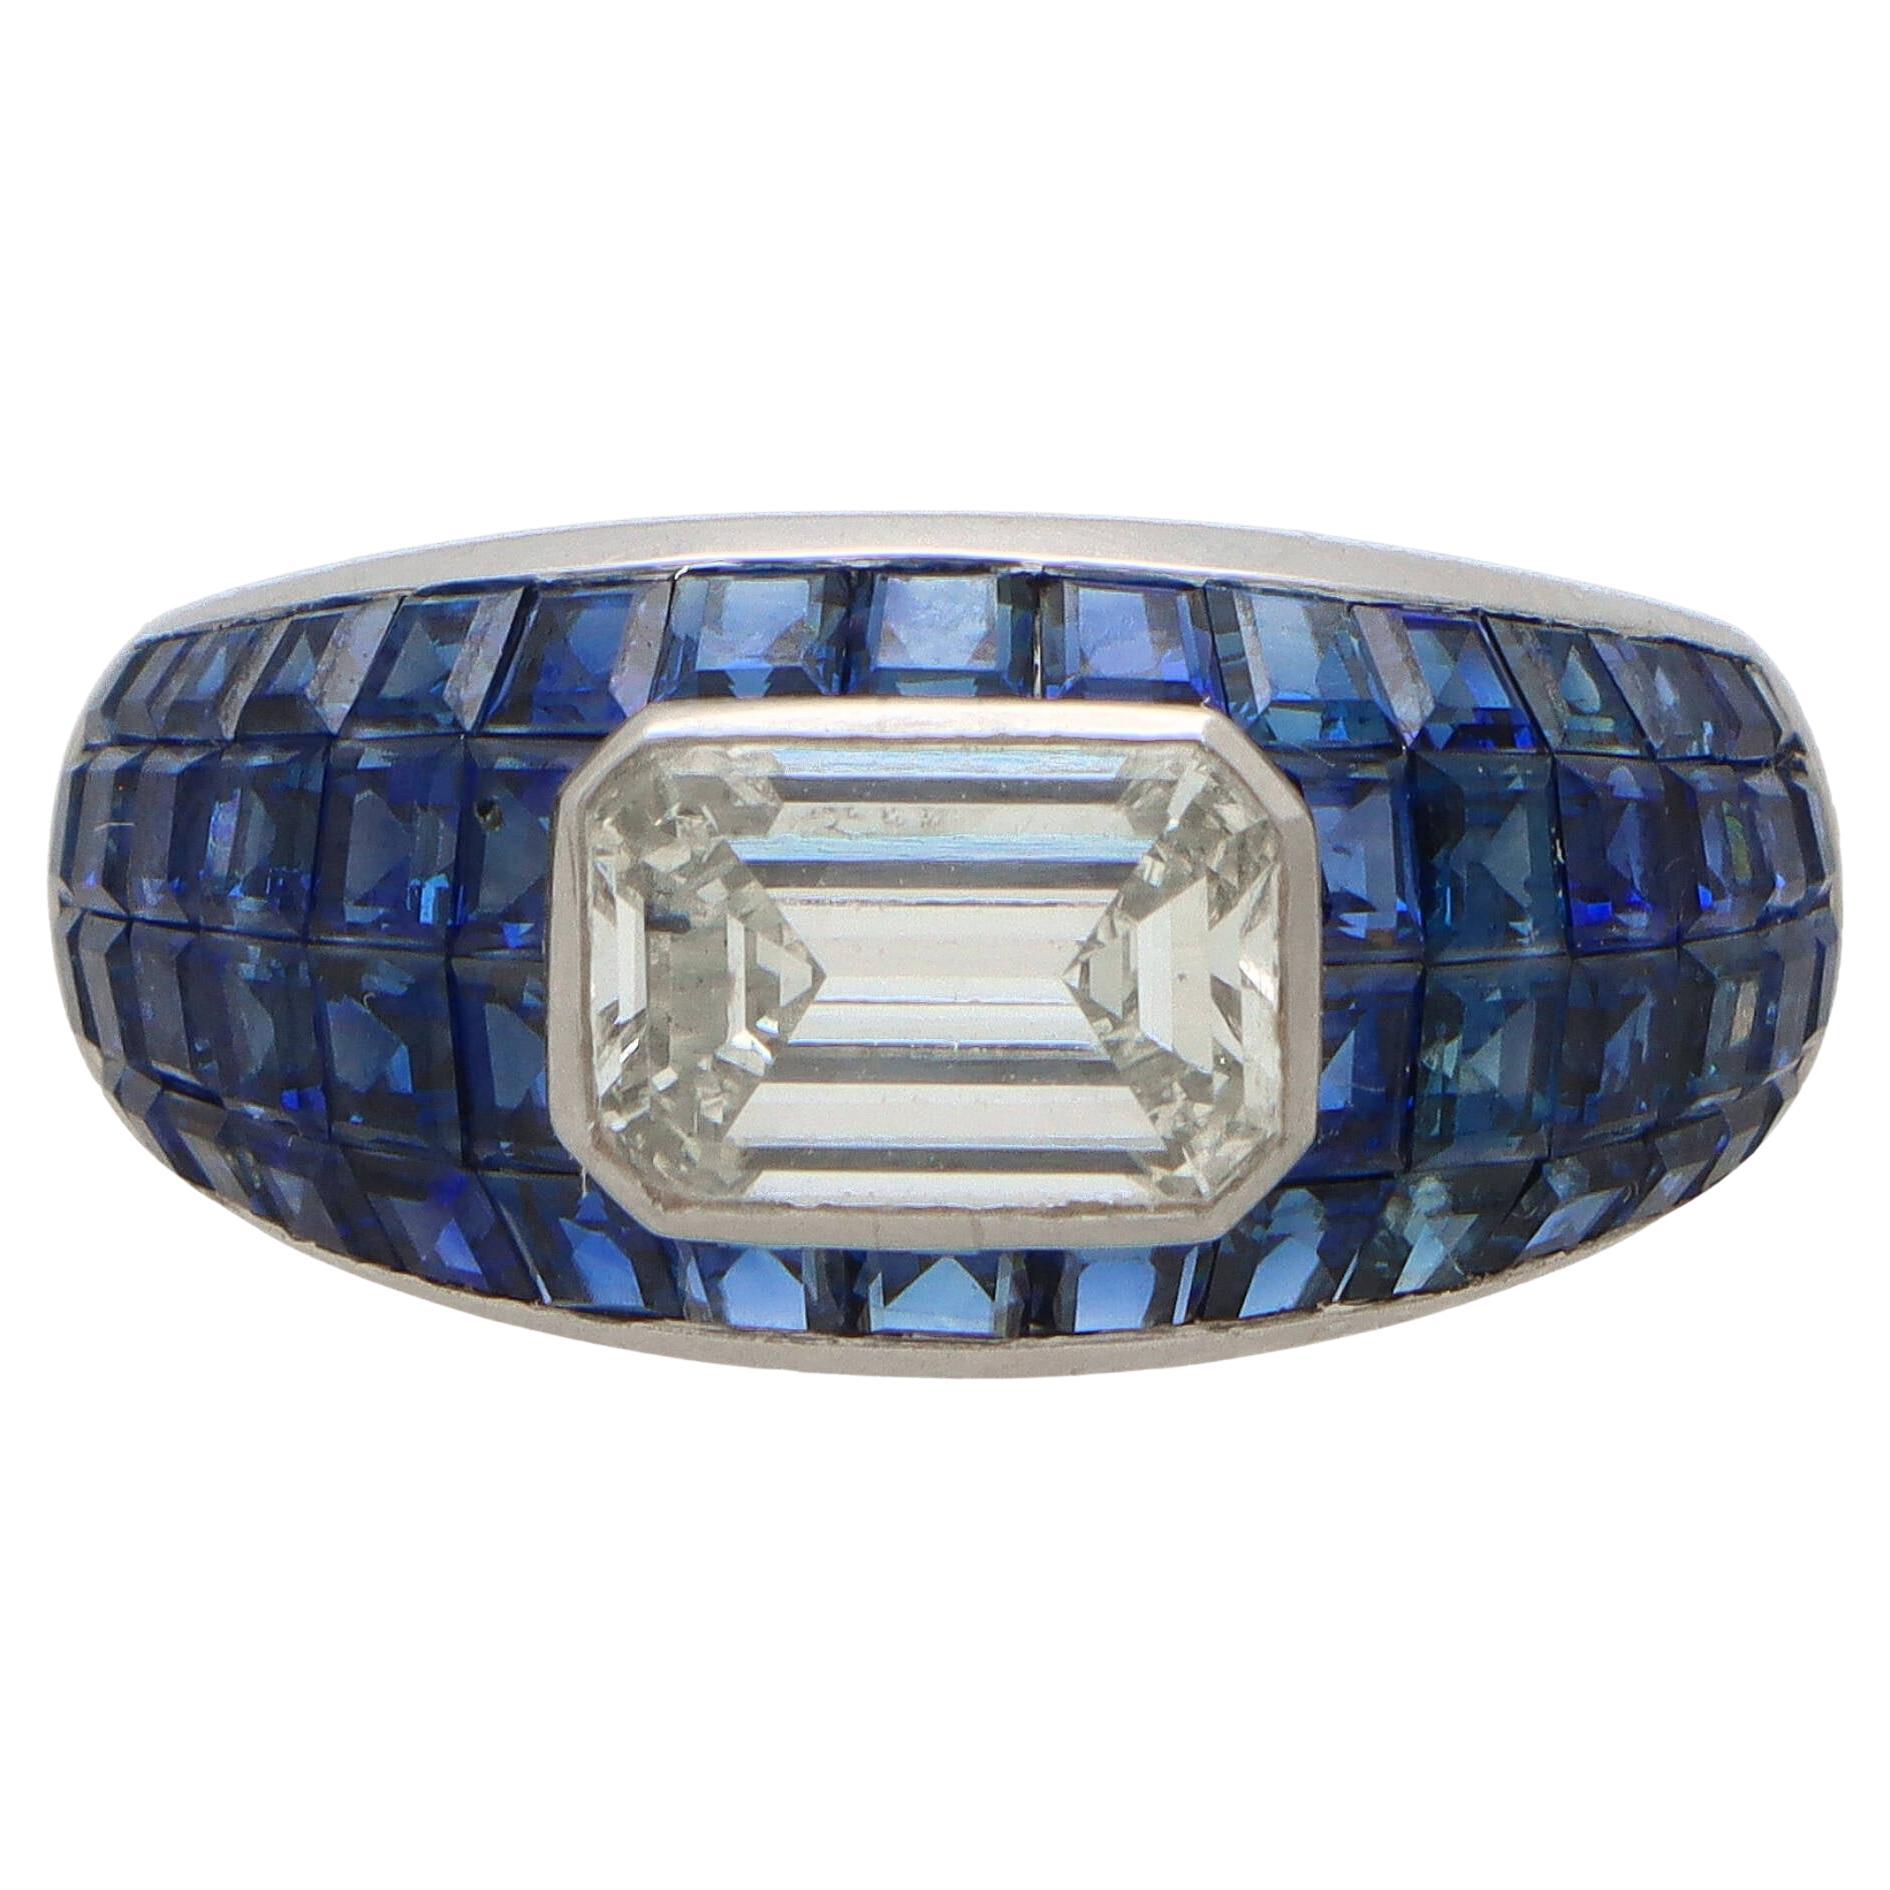 Art Deco Inspired Emerald Cut Diamond and Blue Sapphire Bombe Dress Ring  For Sale